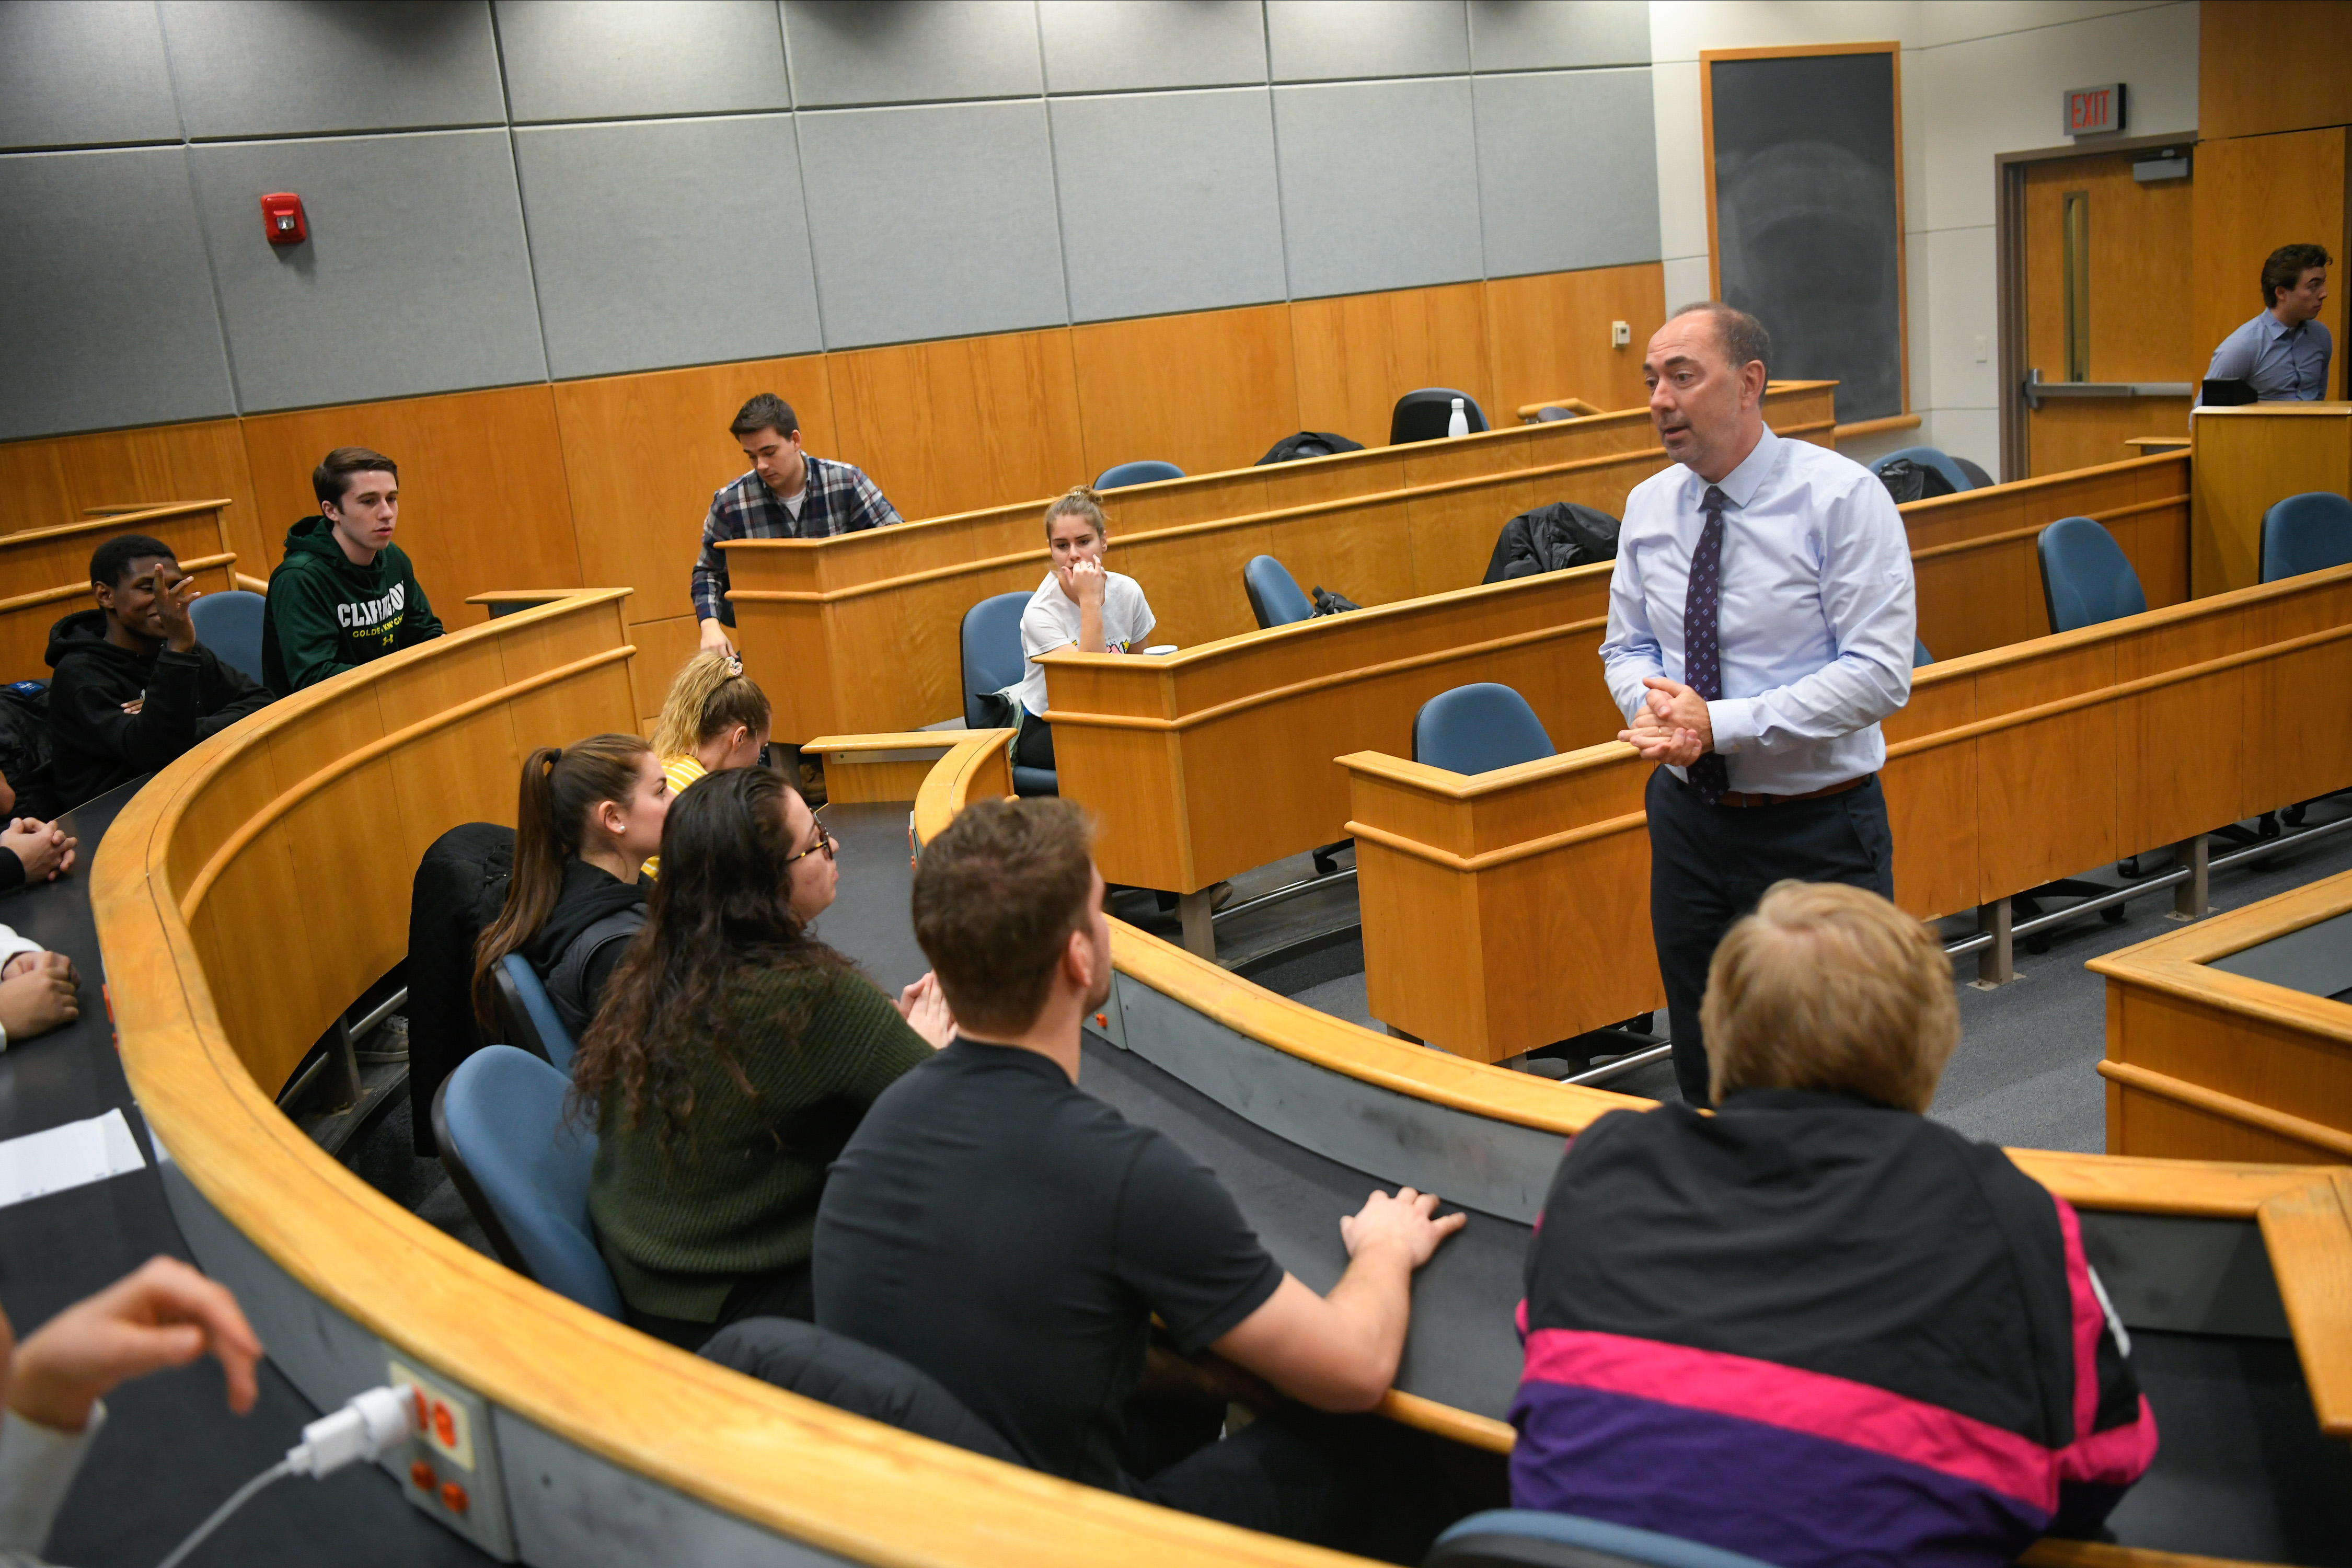 A professor stands in front of students while giving a lecture